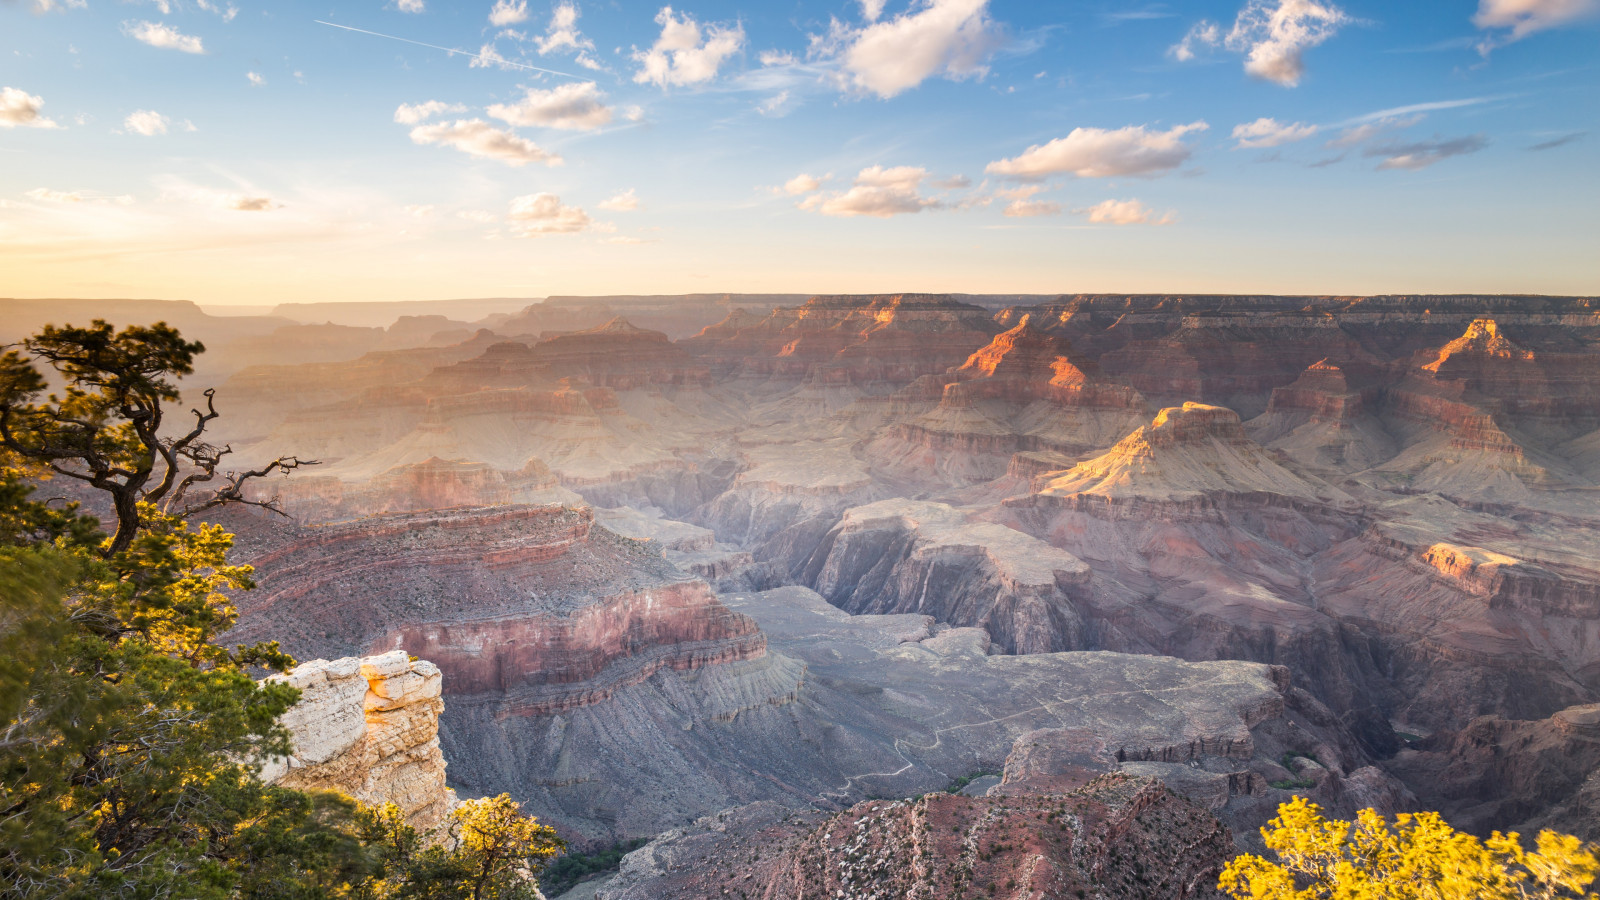 Sunset over the Grand Canyon wallpaper 1600x900